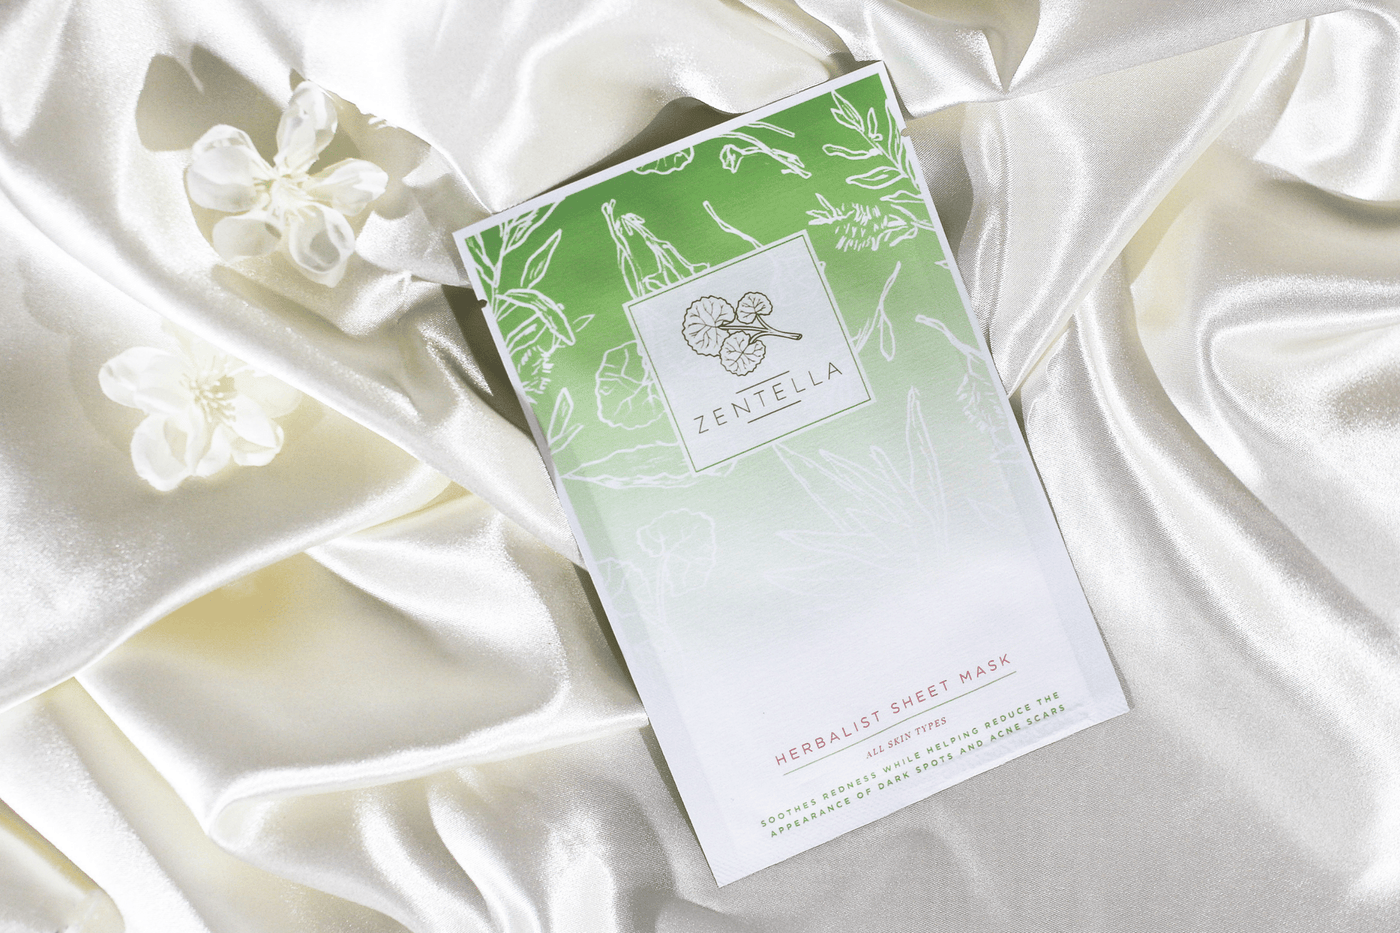 Sheet made from 100% Anti-bacterial Biodegradable Bamboo    Contains 12 anti-inflammatories, redness-reducing herbs + 6 nourishing ingredients    Speeds up wound healing for skin pickers    Soothing for sensitive skin types